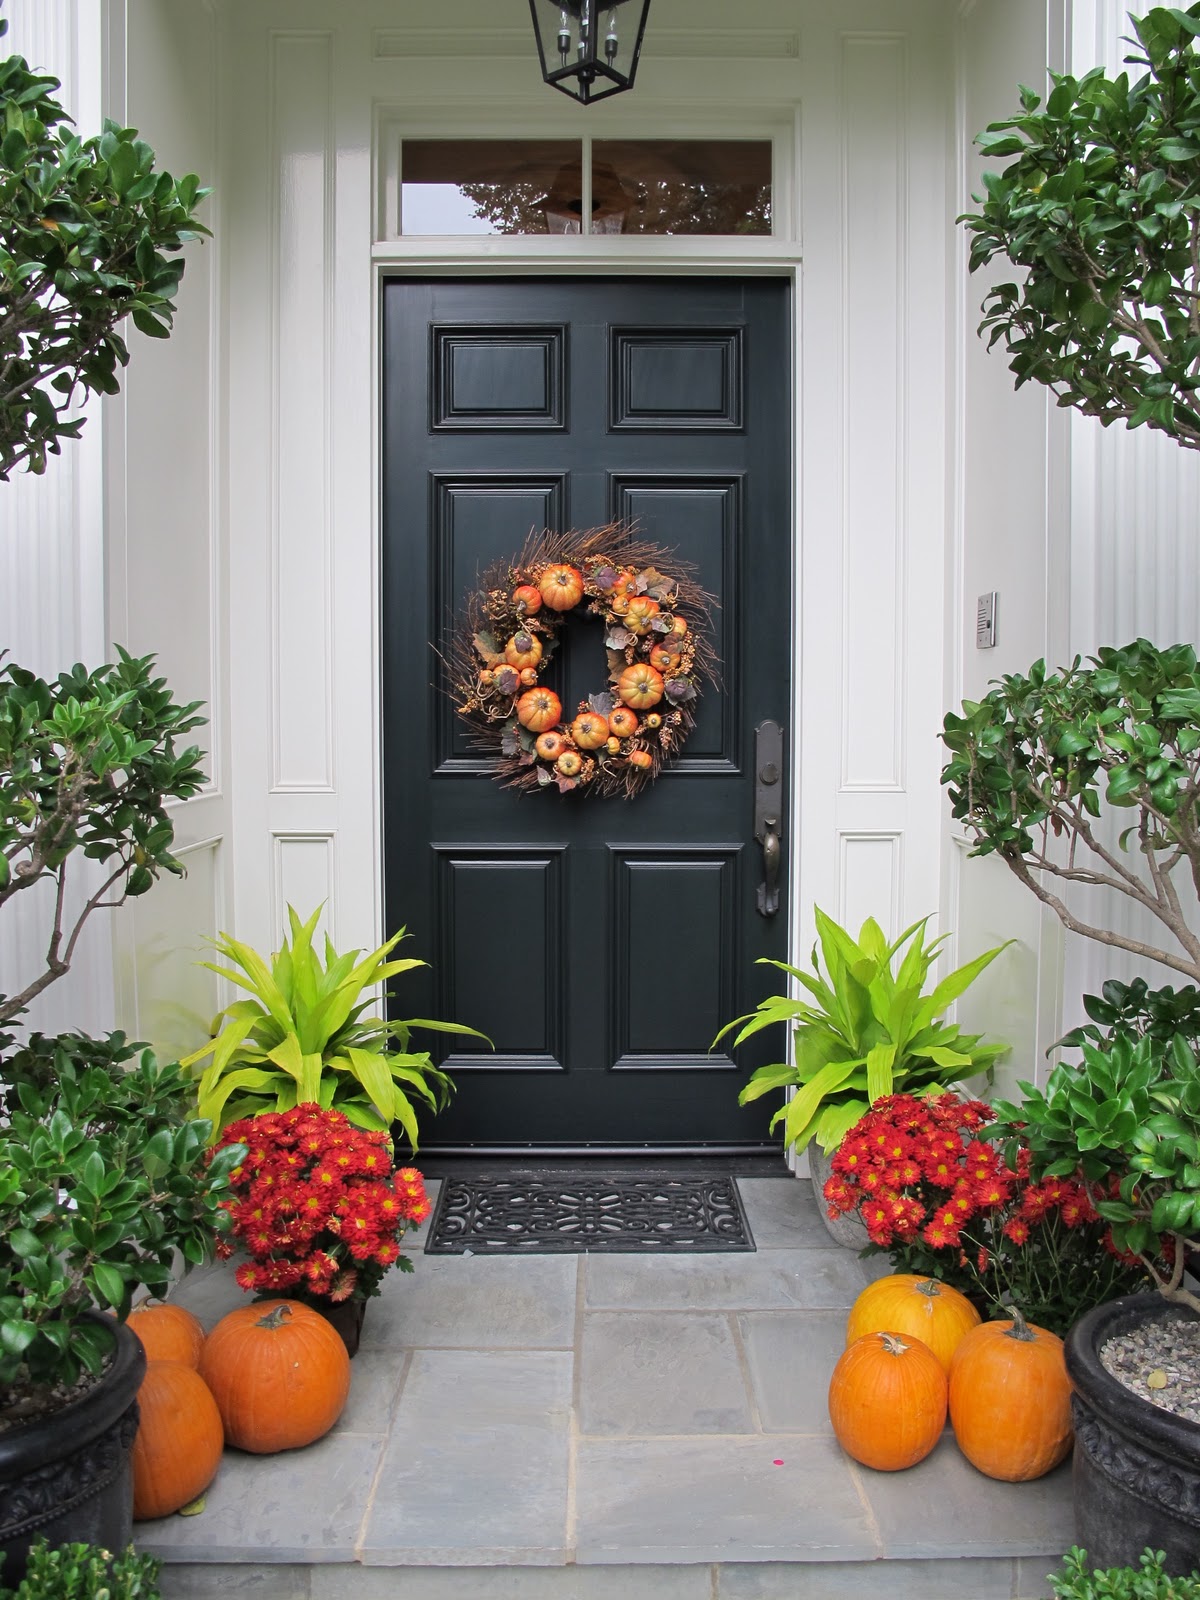 Oversized Plant Pots And Cute Orange Pumpkin For Fall Decoration